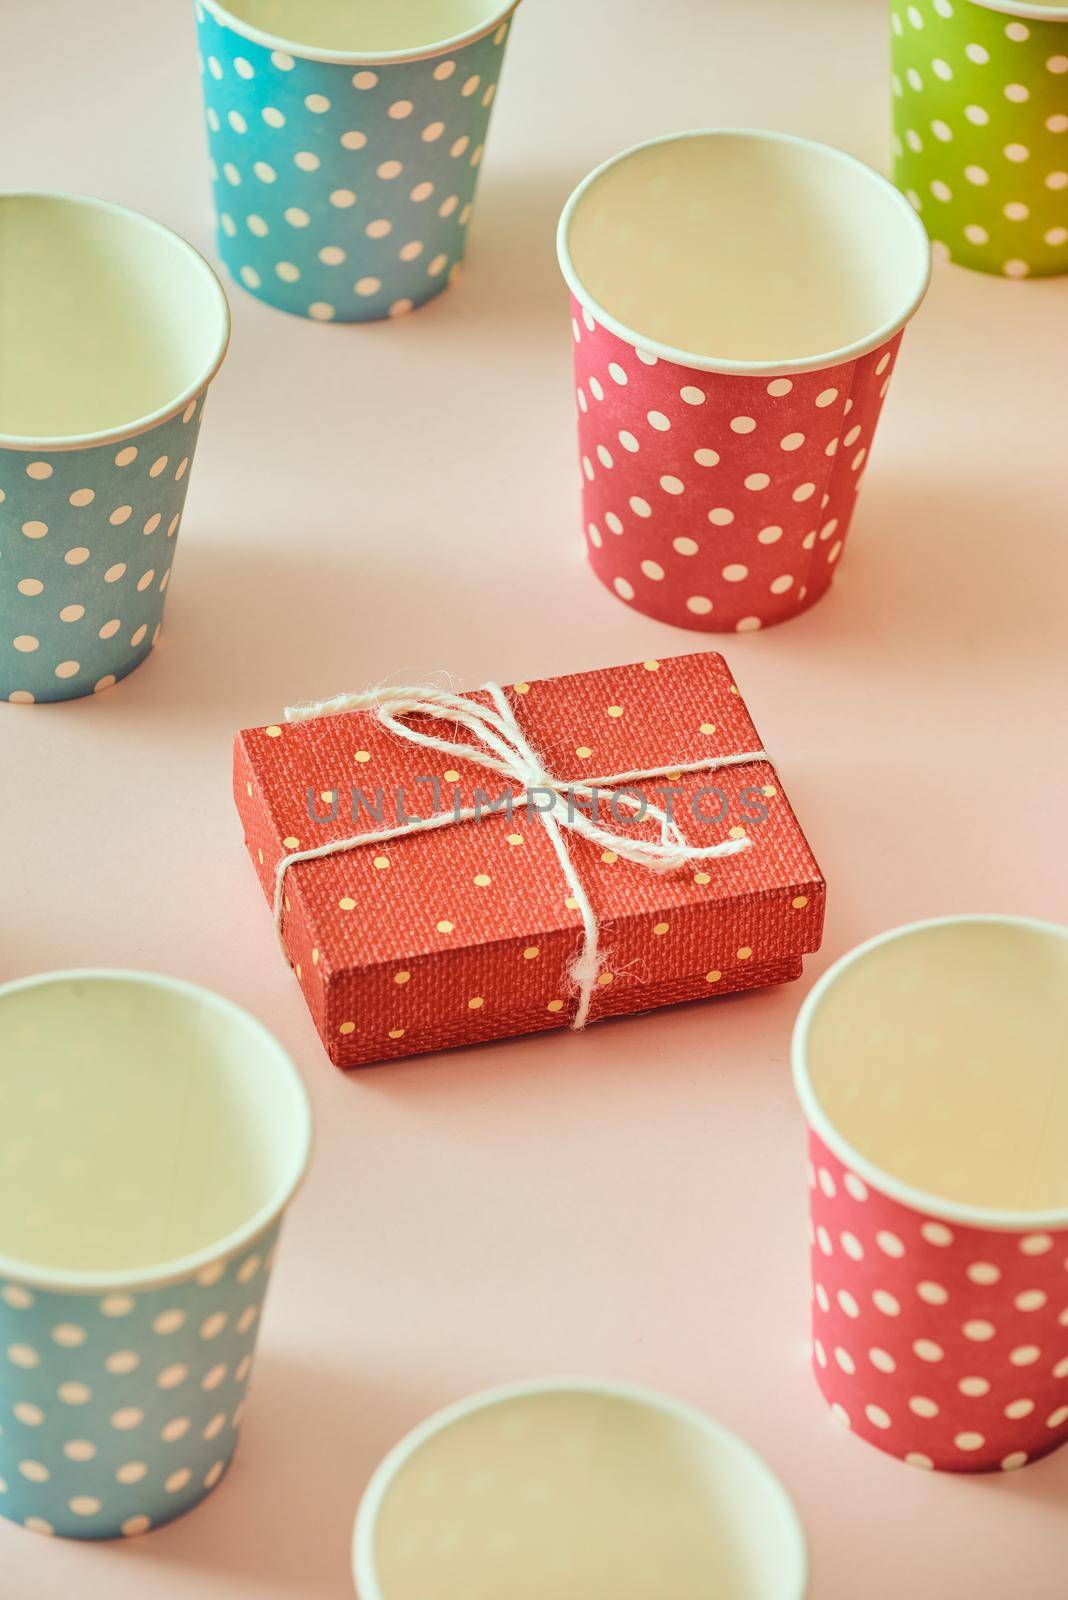 Flatlay with gifts in wrapped boxes top view on pastel color background